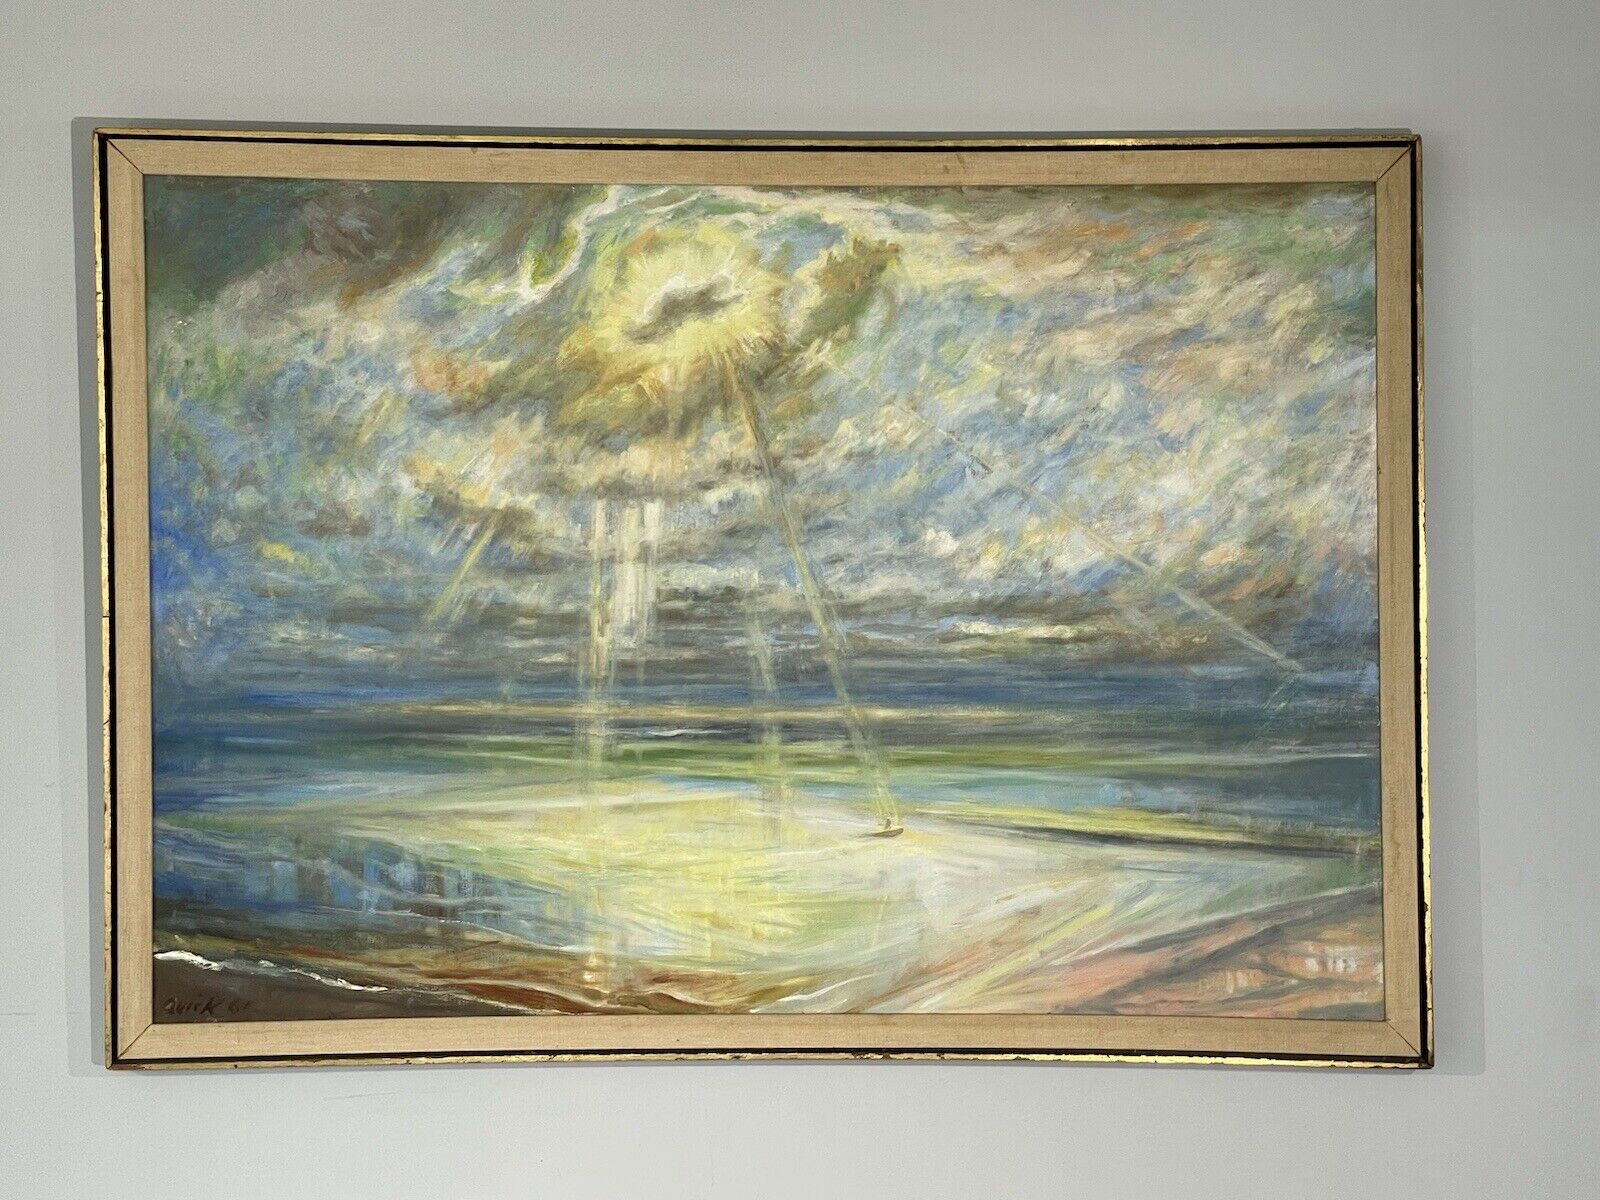 1961 Minnesota Artist Birney Quick Framed Oil on Canvas Seascape with Boater